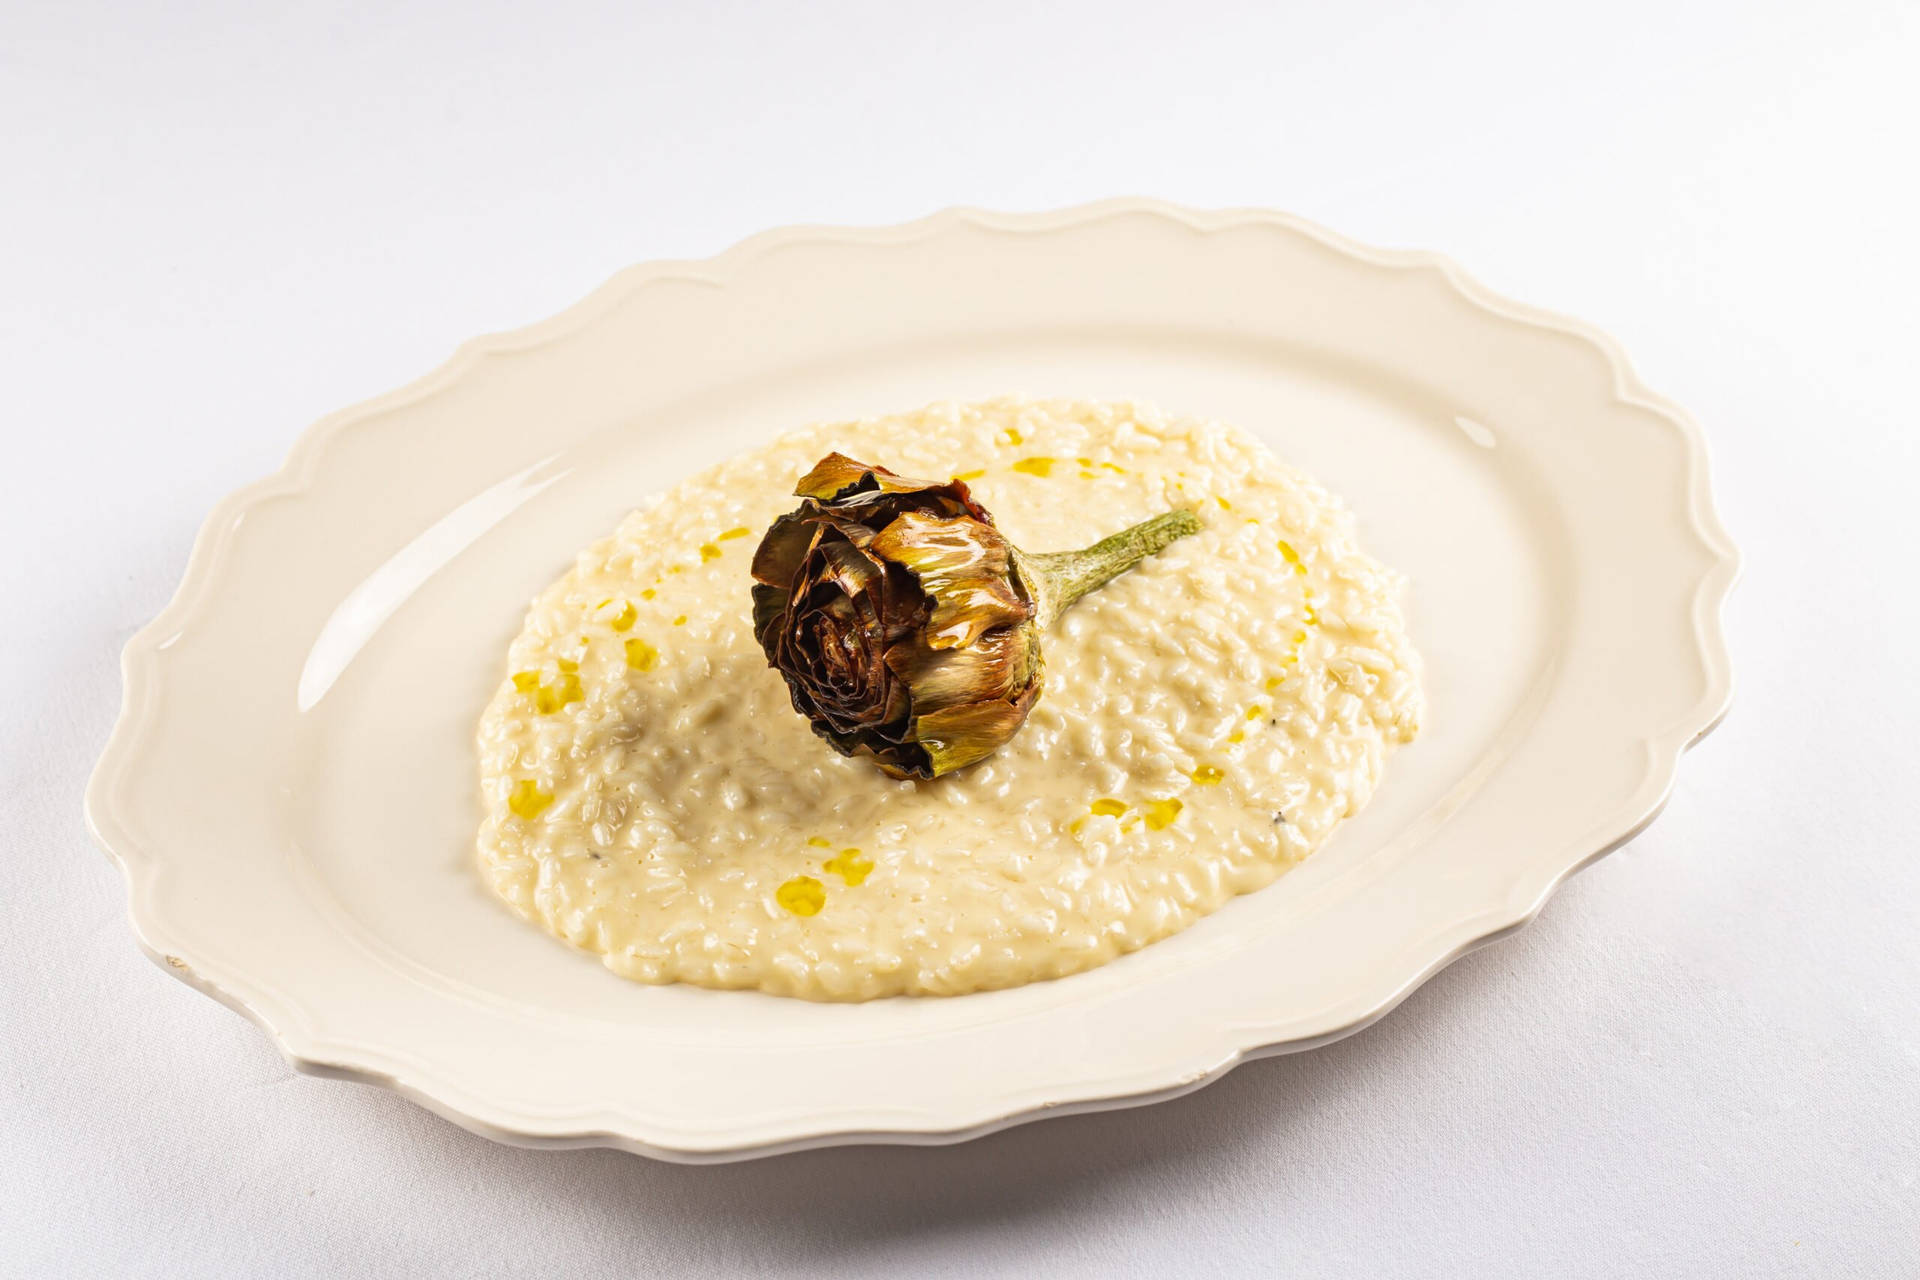 Elegant Gourmet Risotto with Dried Rose Garnish Wallpaper